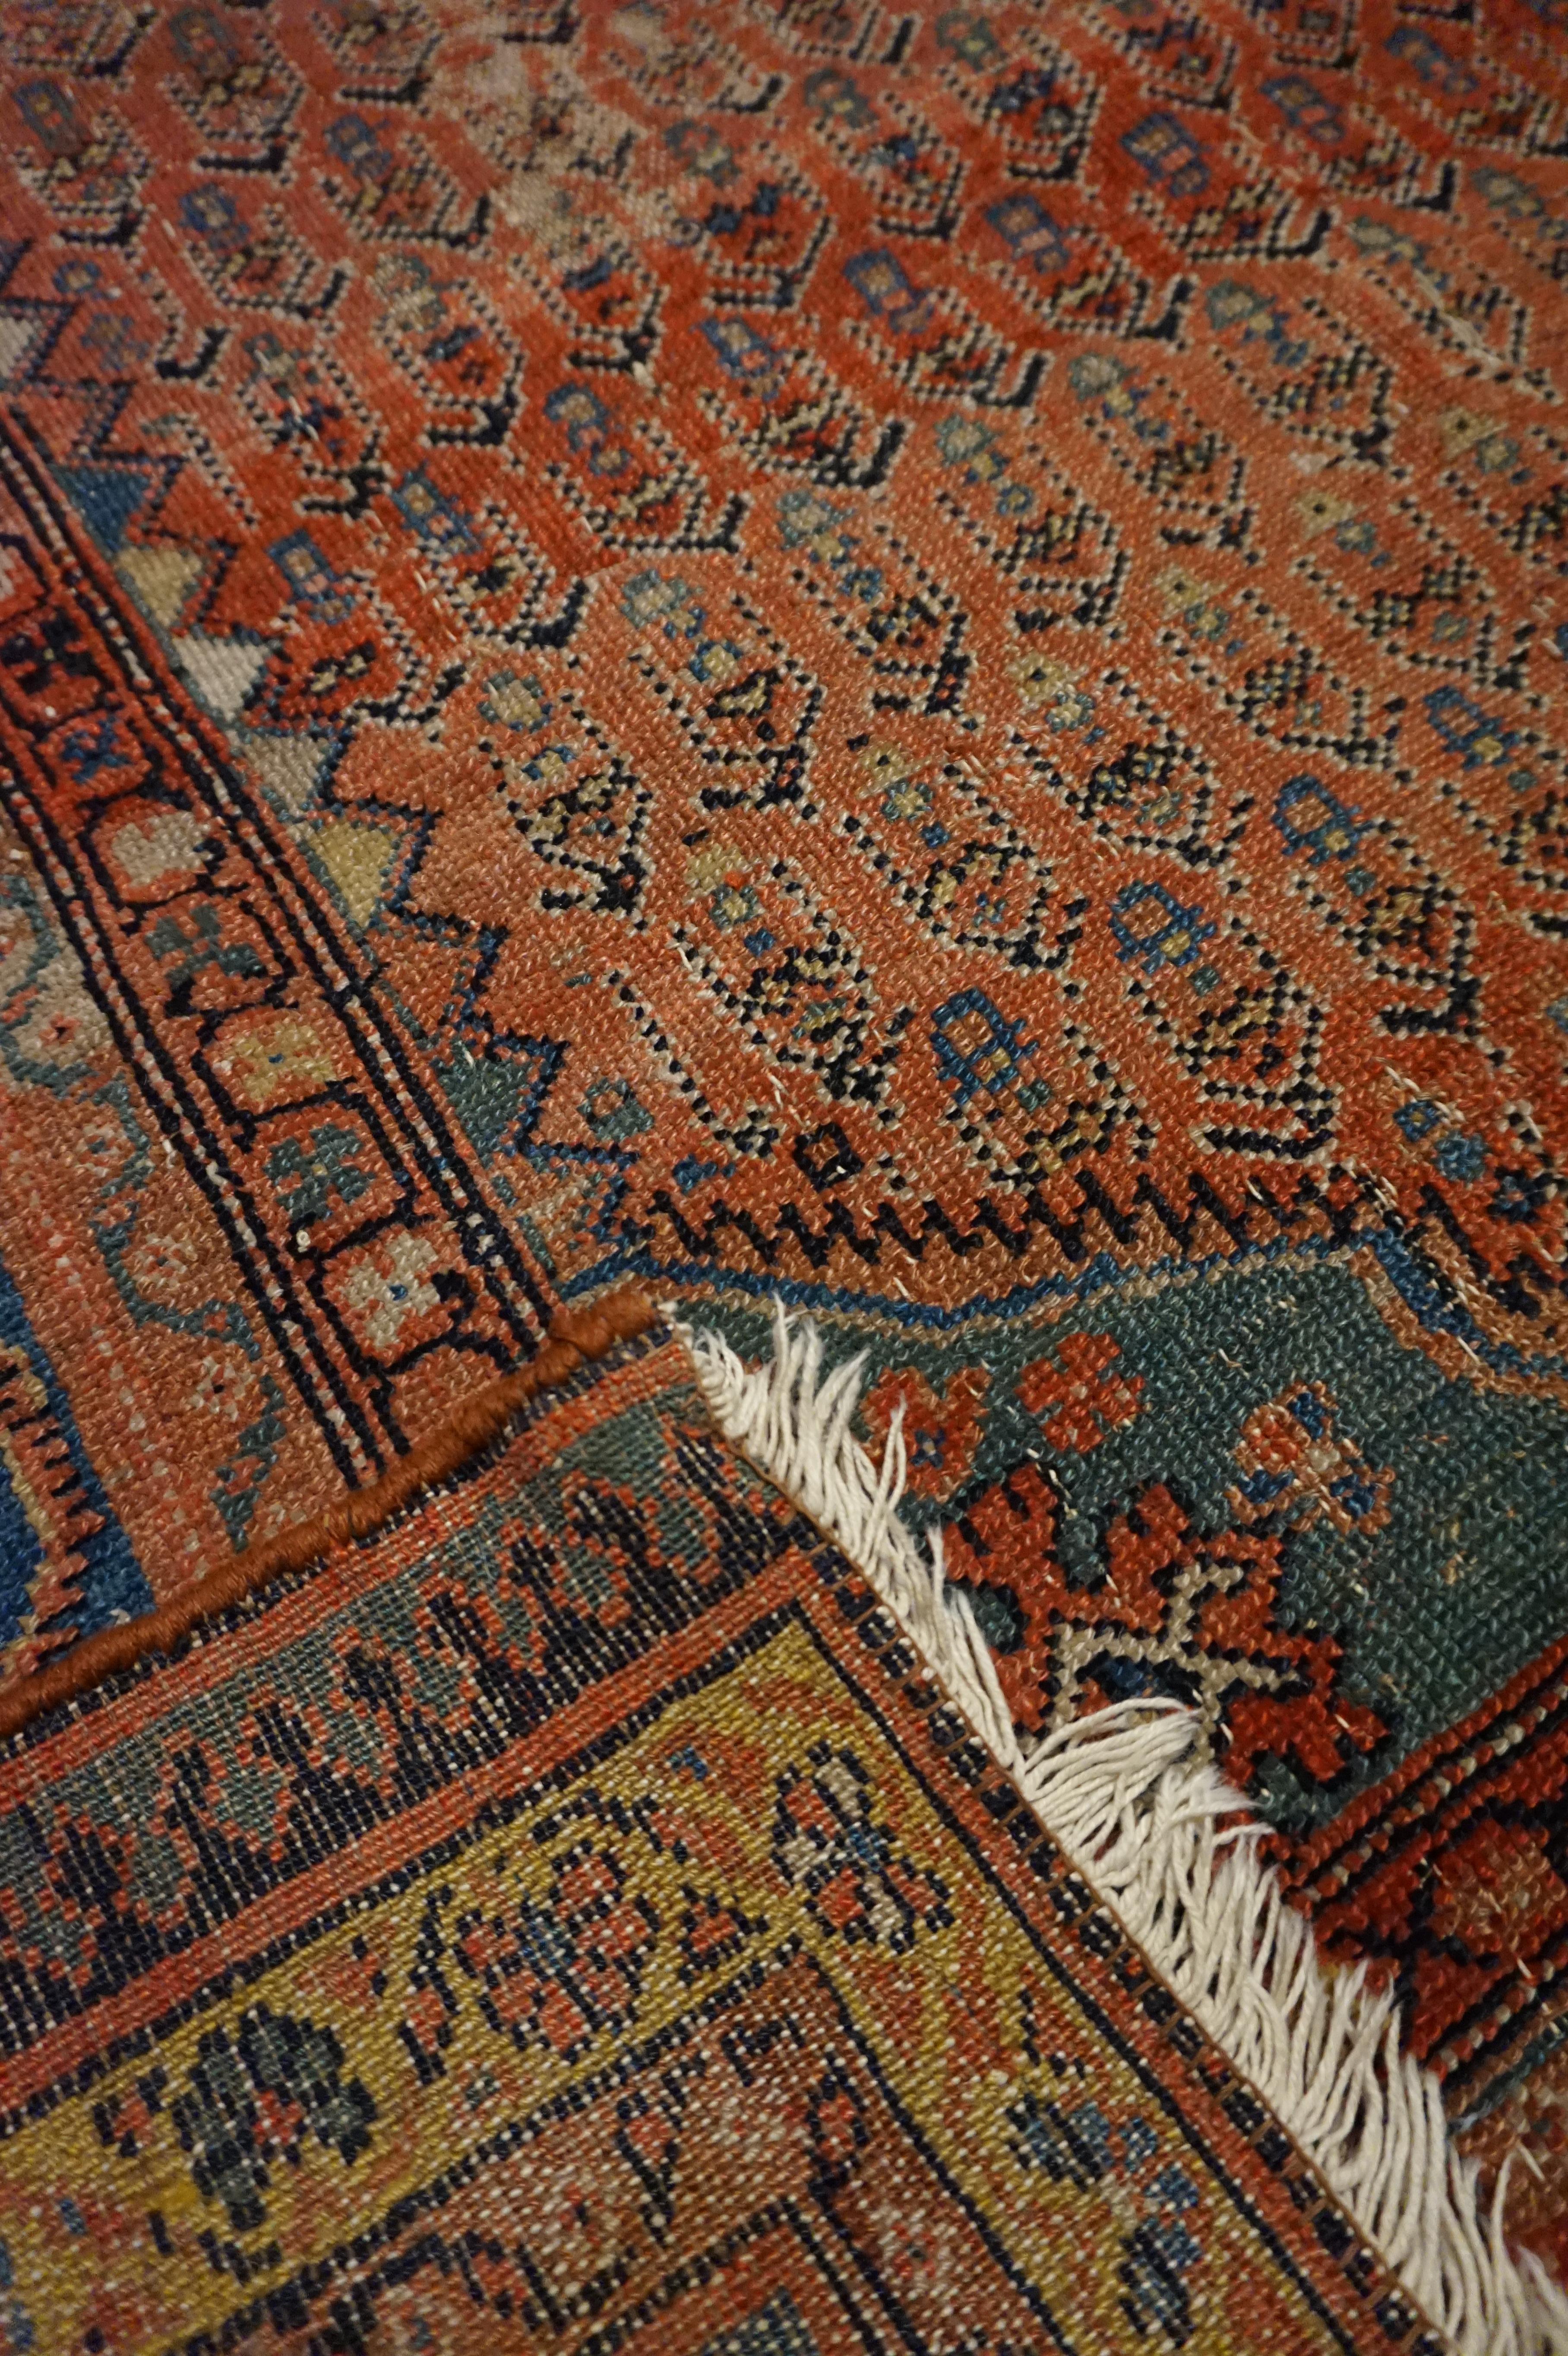 19th Century Tribal Boteh Paisley Hand-knotted Rug In Rust Hues For Sale 5